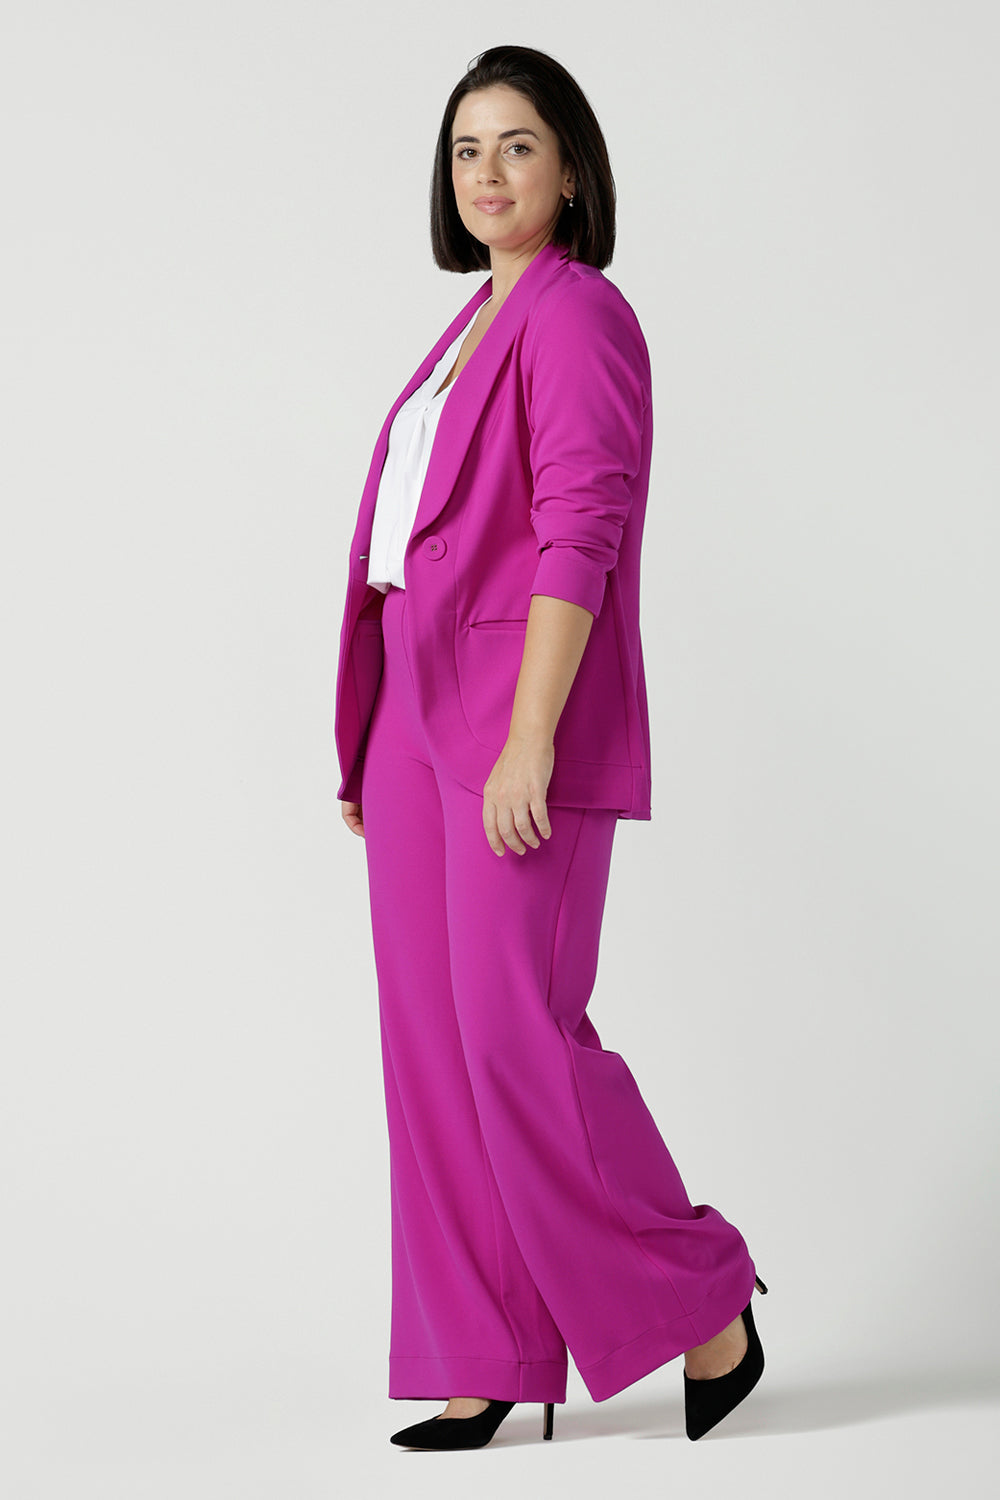 Size 10 woman wears a fuchsia Merit Blazer in scuba crepe. Tailored design with self covered buttons, shawl collar and curved hem and pockets. Size inclusive for stylish corporate workwear for women. Size 8 - 24.